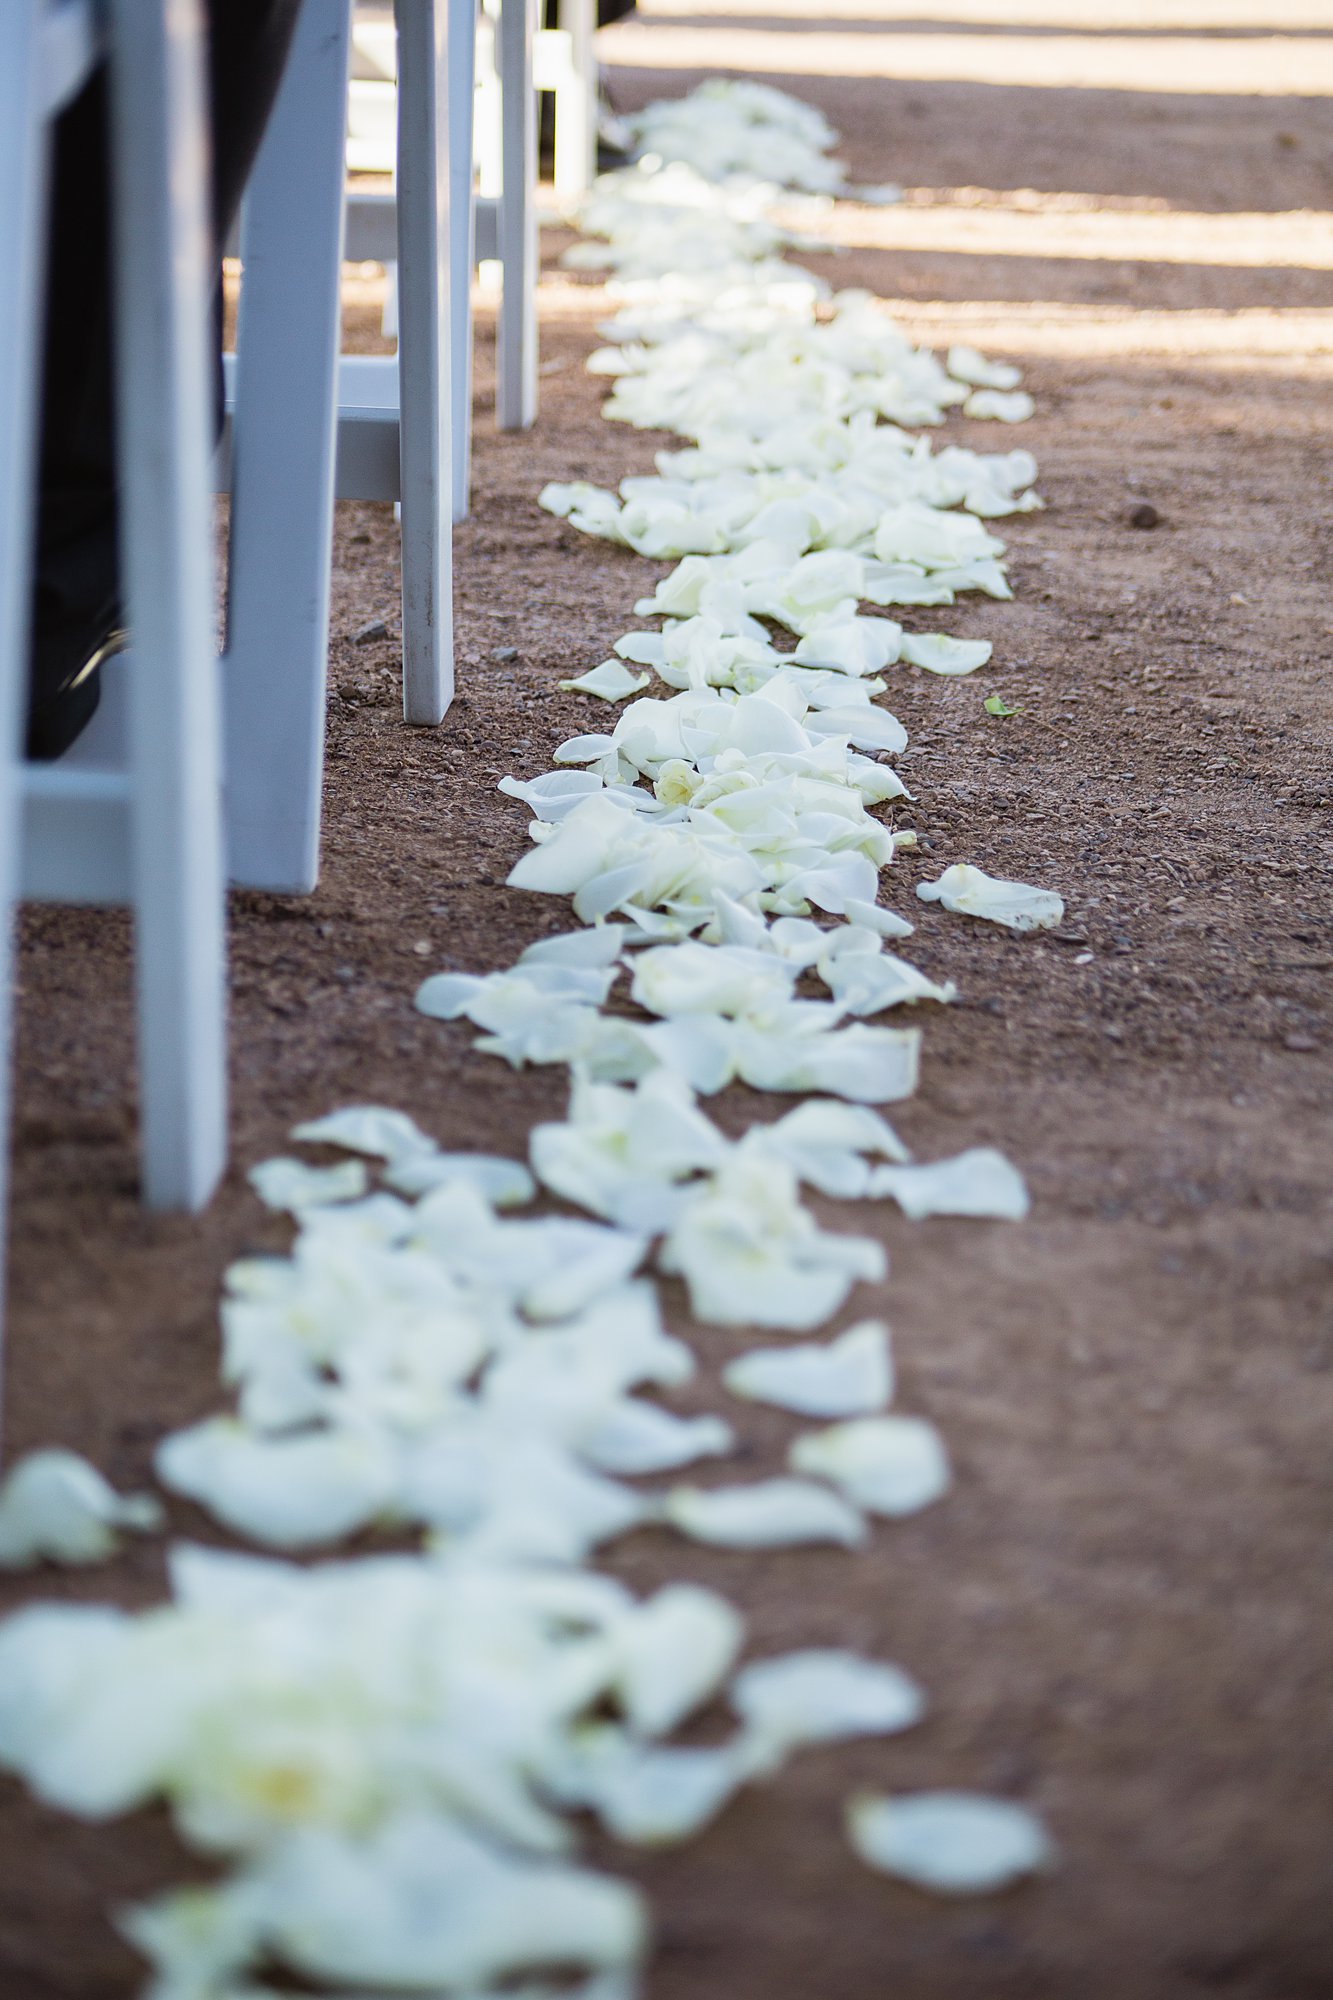 Detail image of white rose pedals lining the aisle for a wedding ceremony.